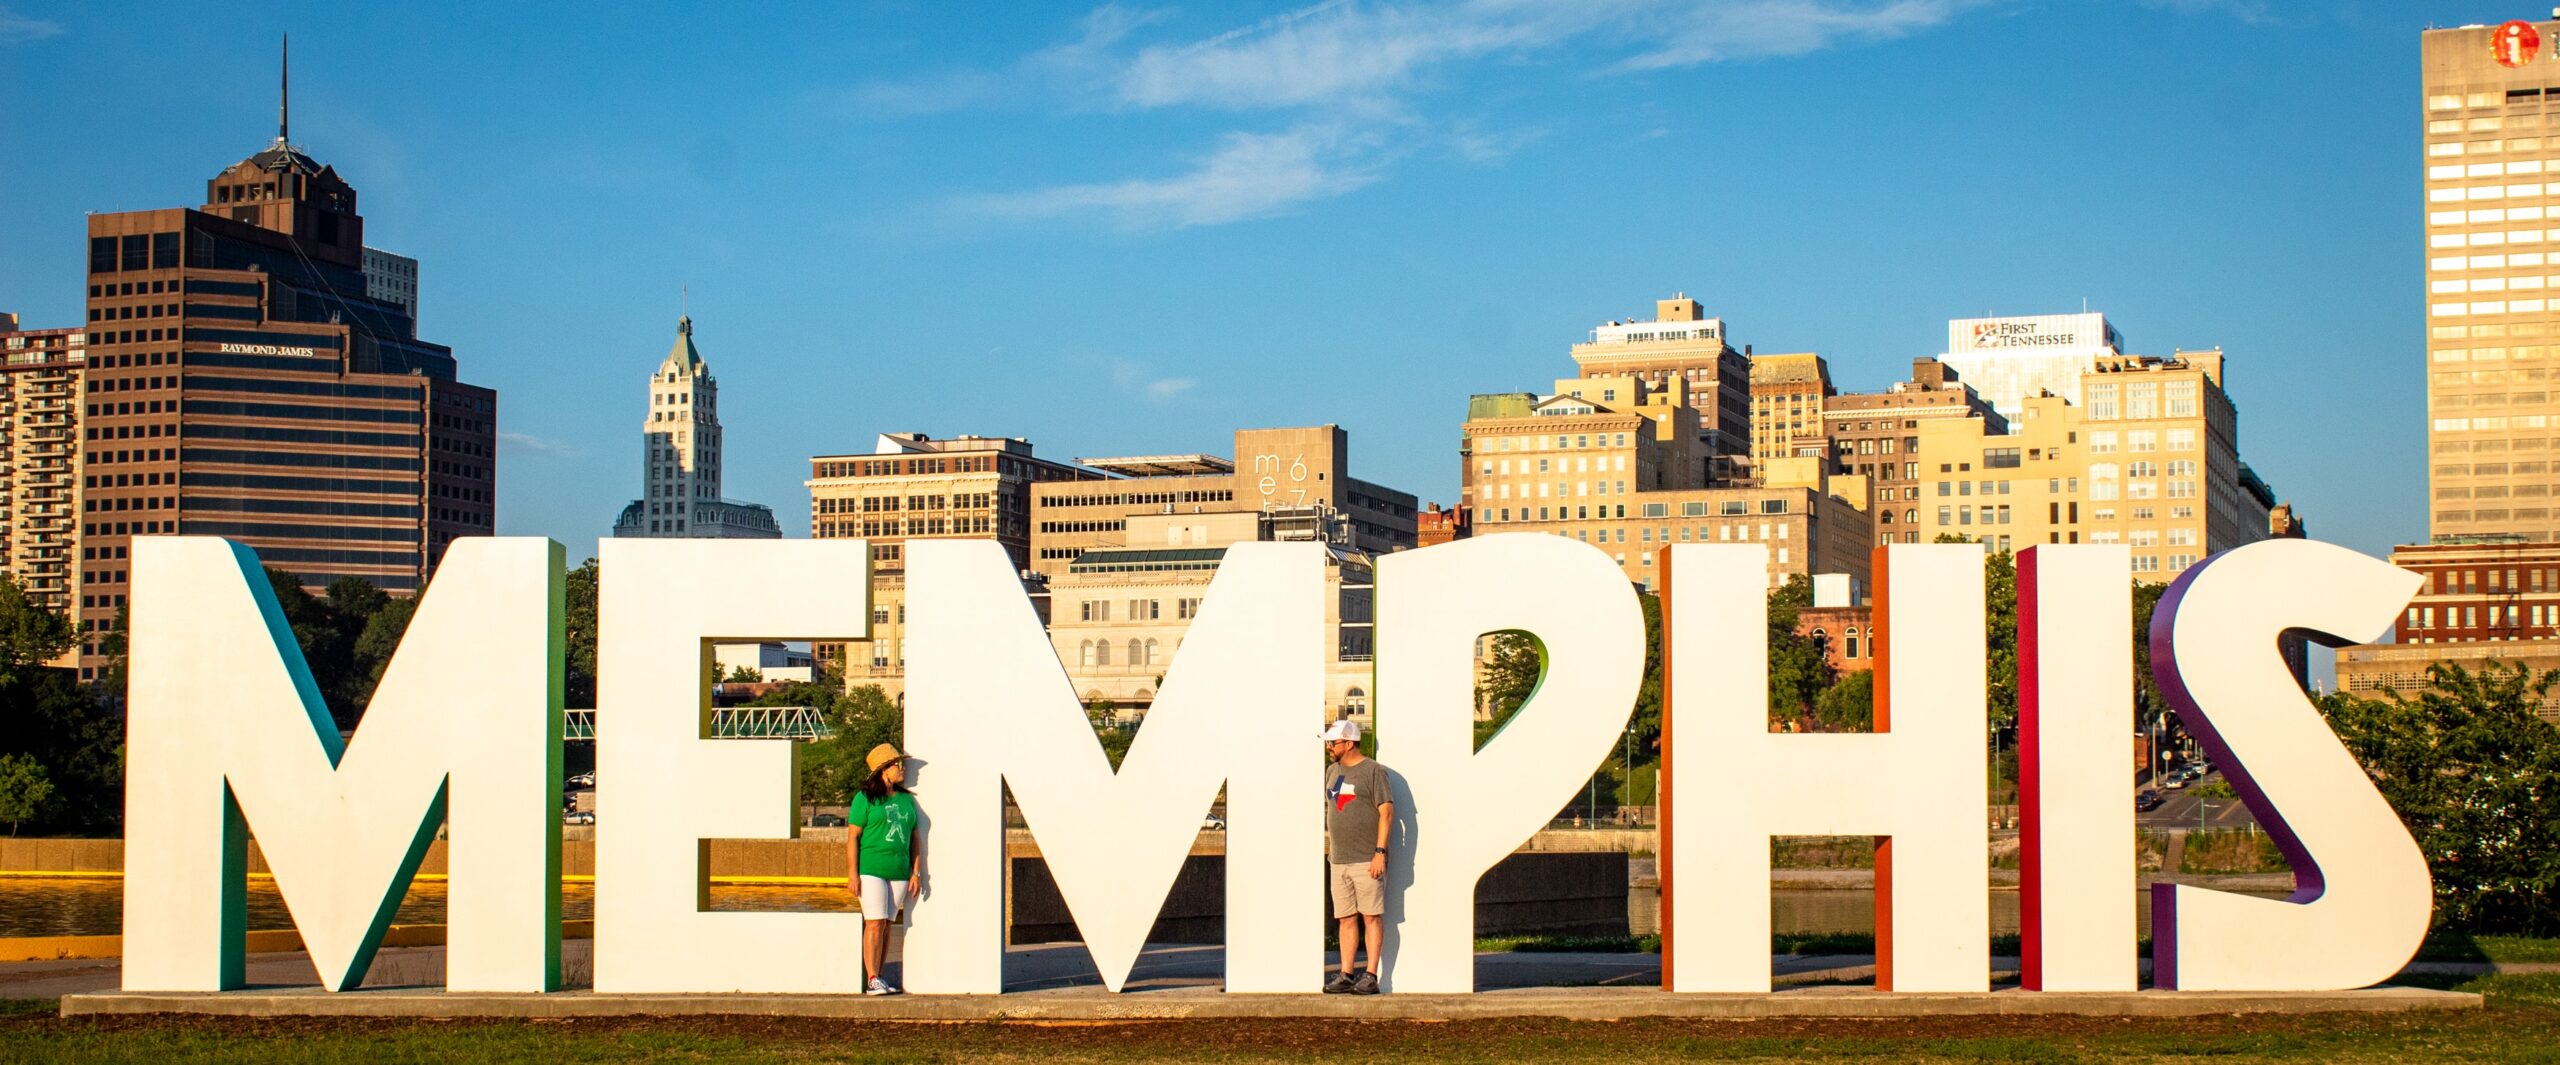 Memphis is one of the best places to live Tennessee for blues and sports. Pictured: Memphis sign